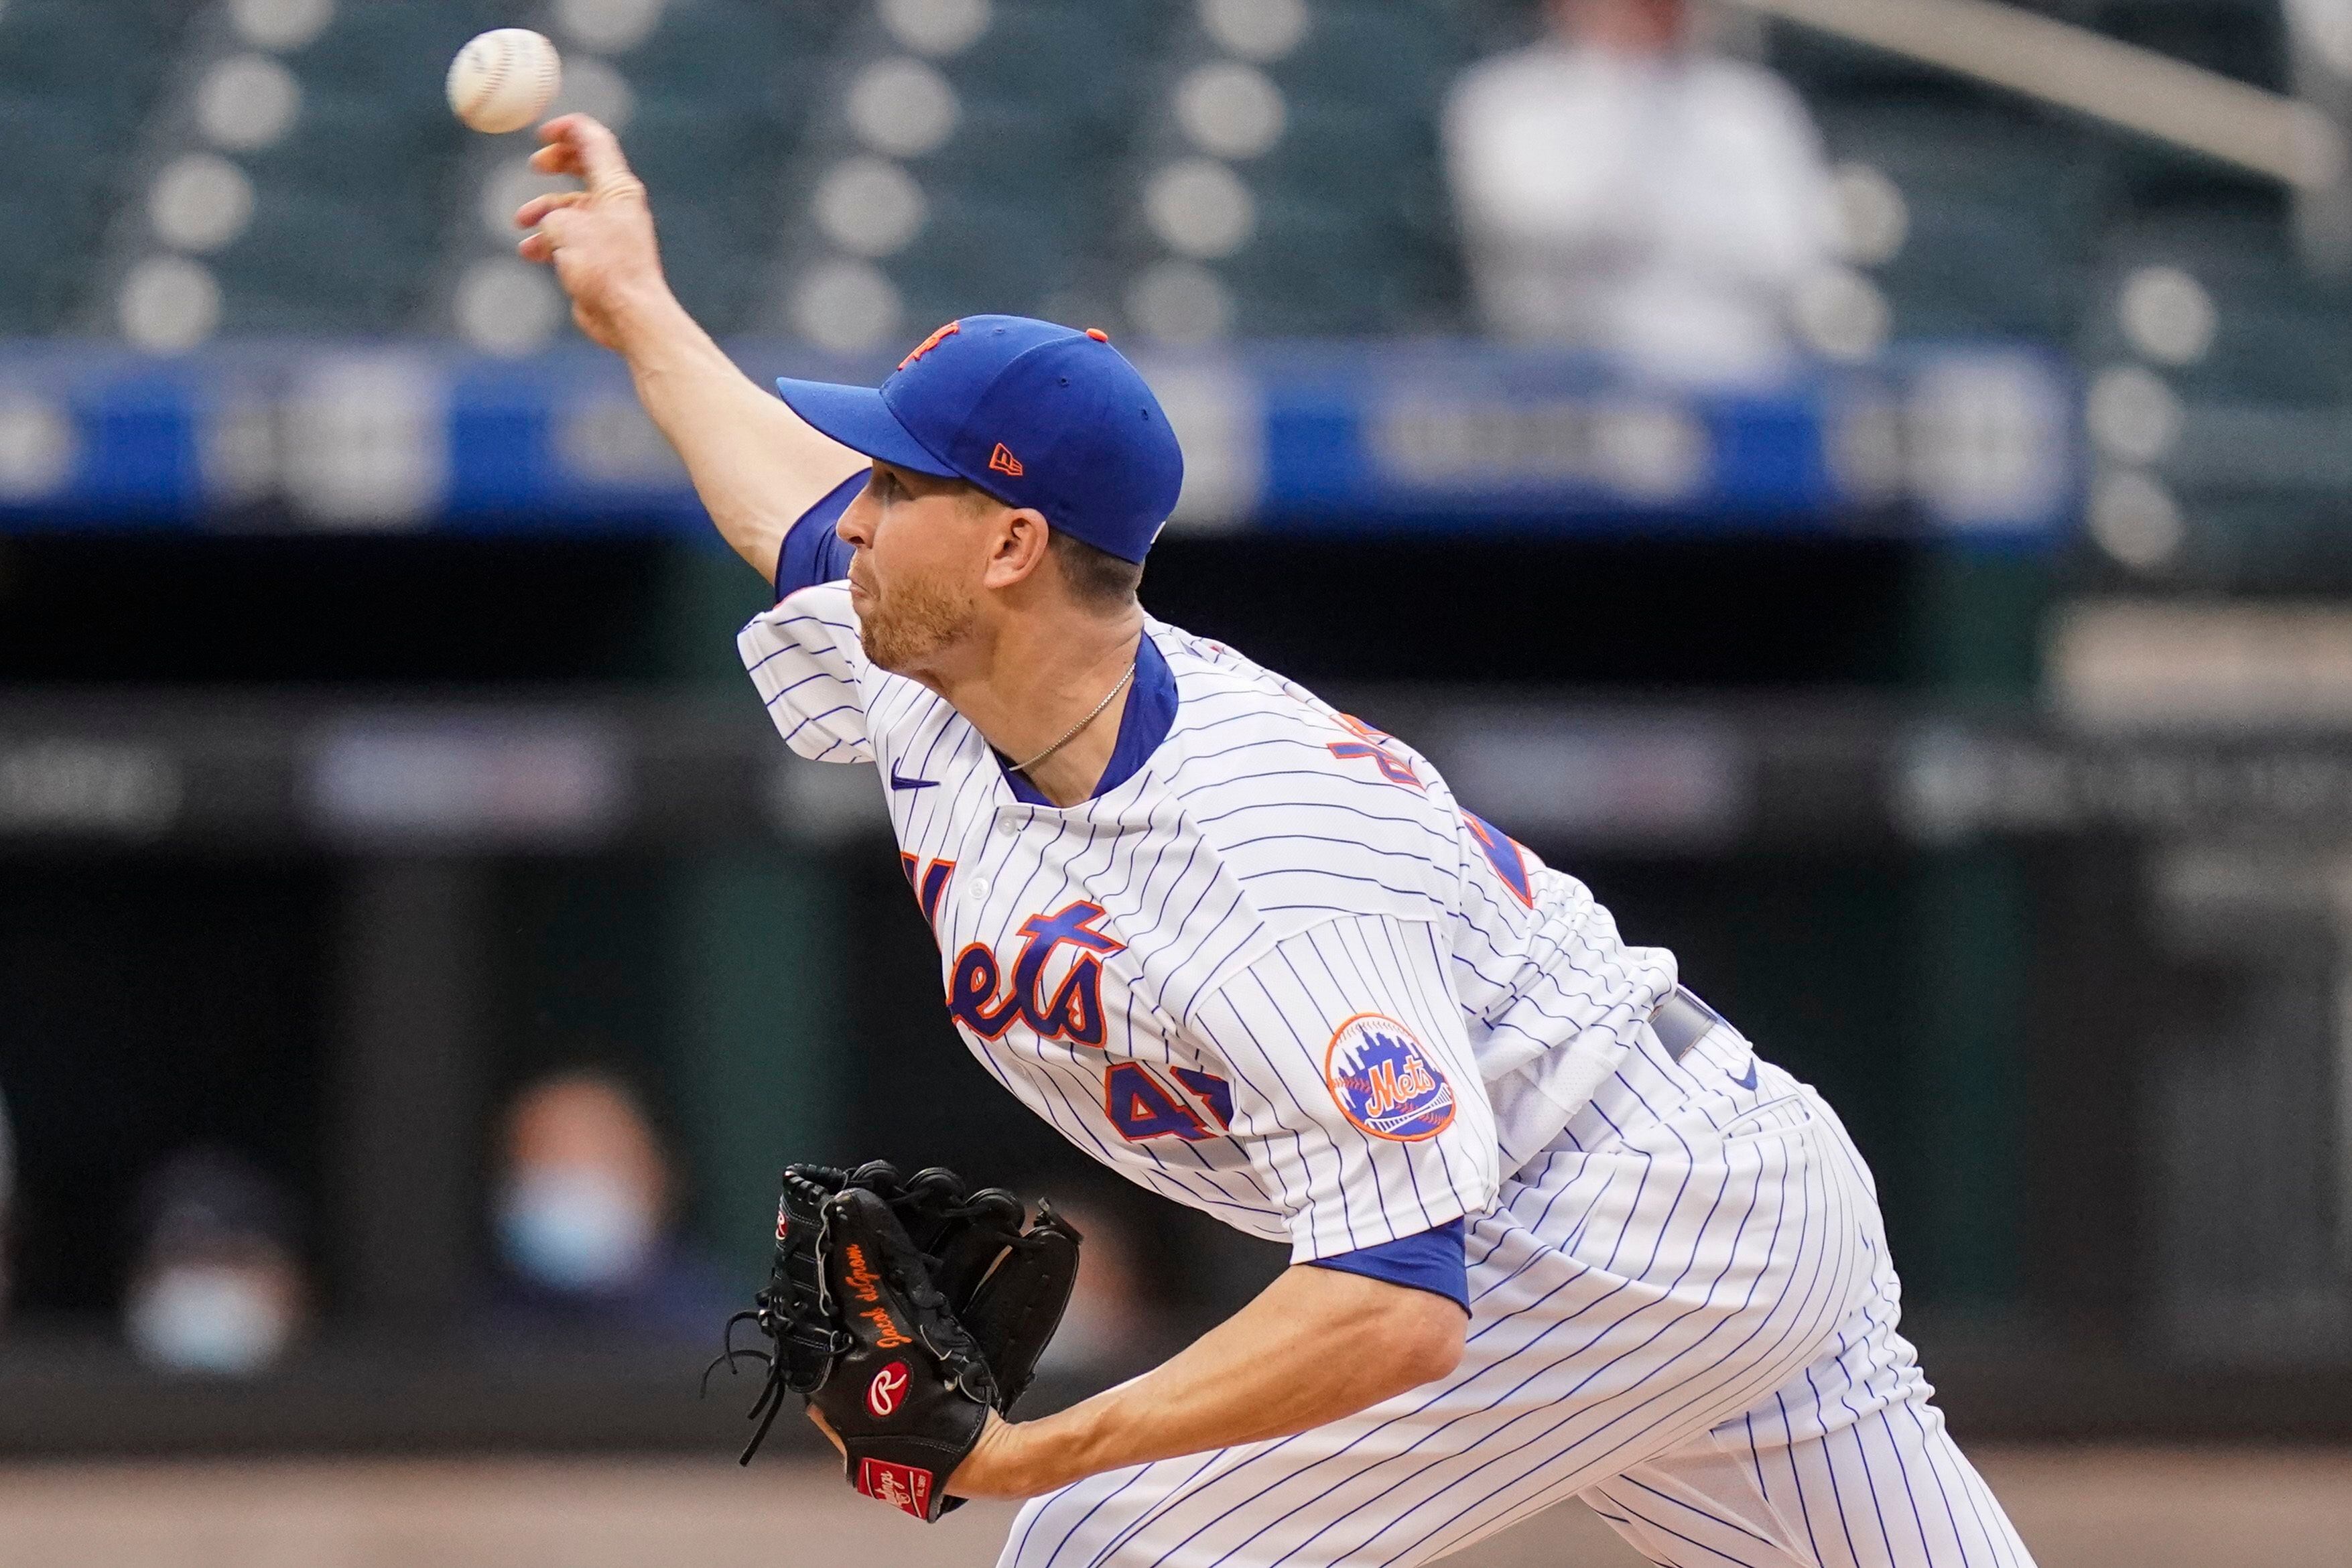 Mets' Jacob deGrom will not pitch again this season